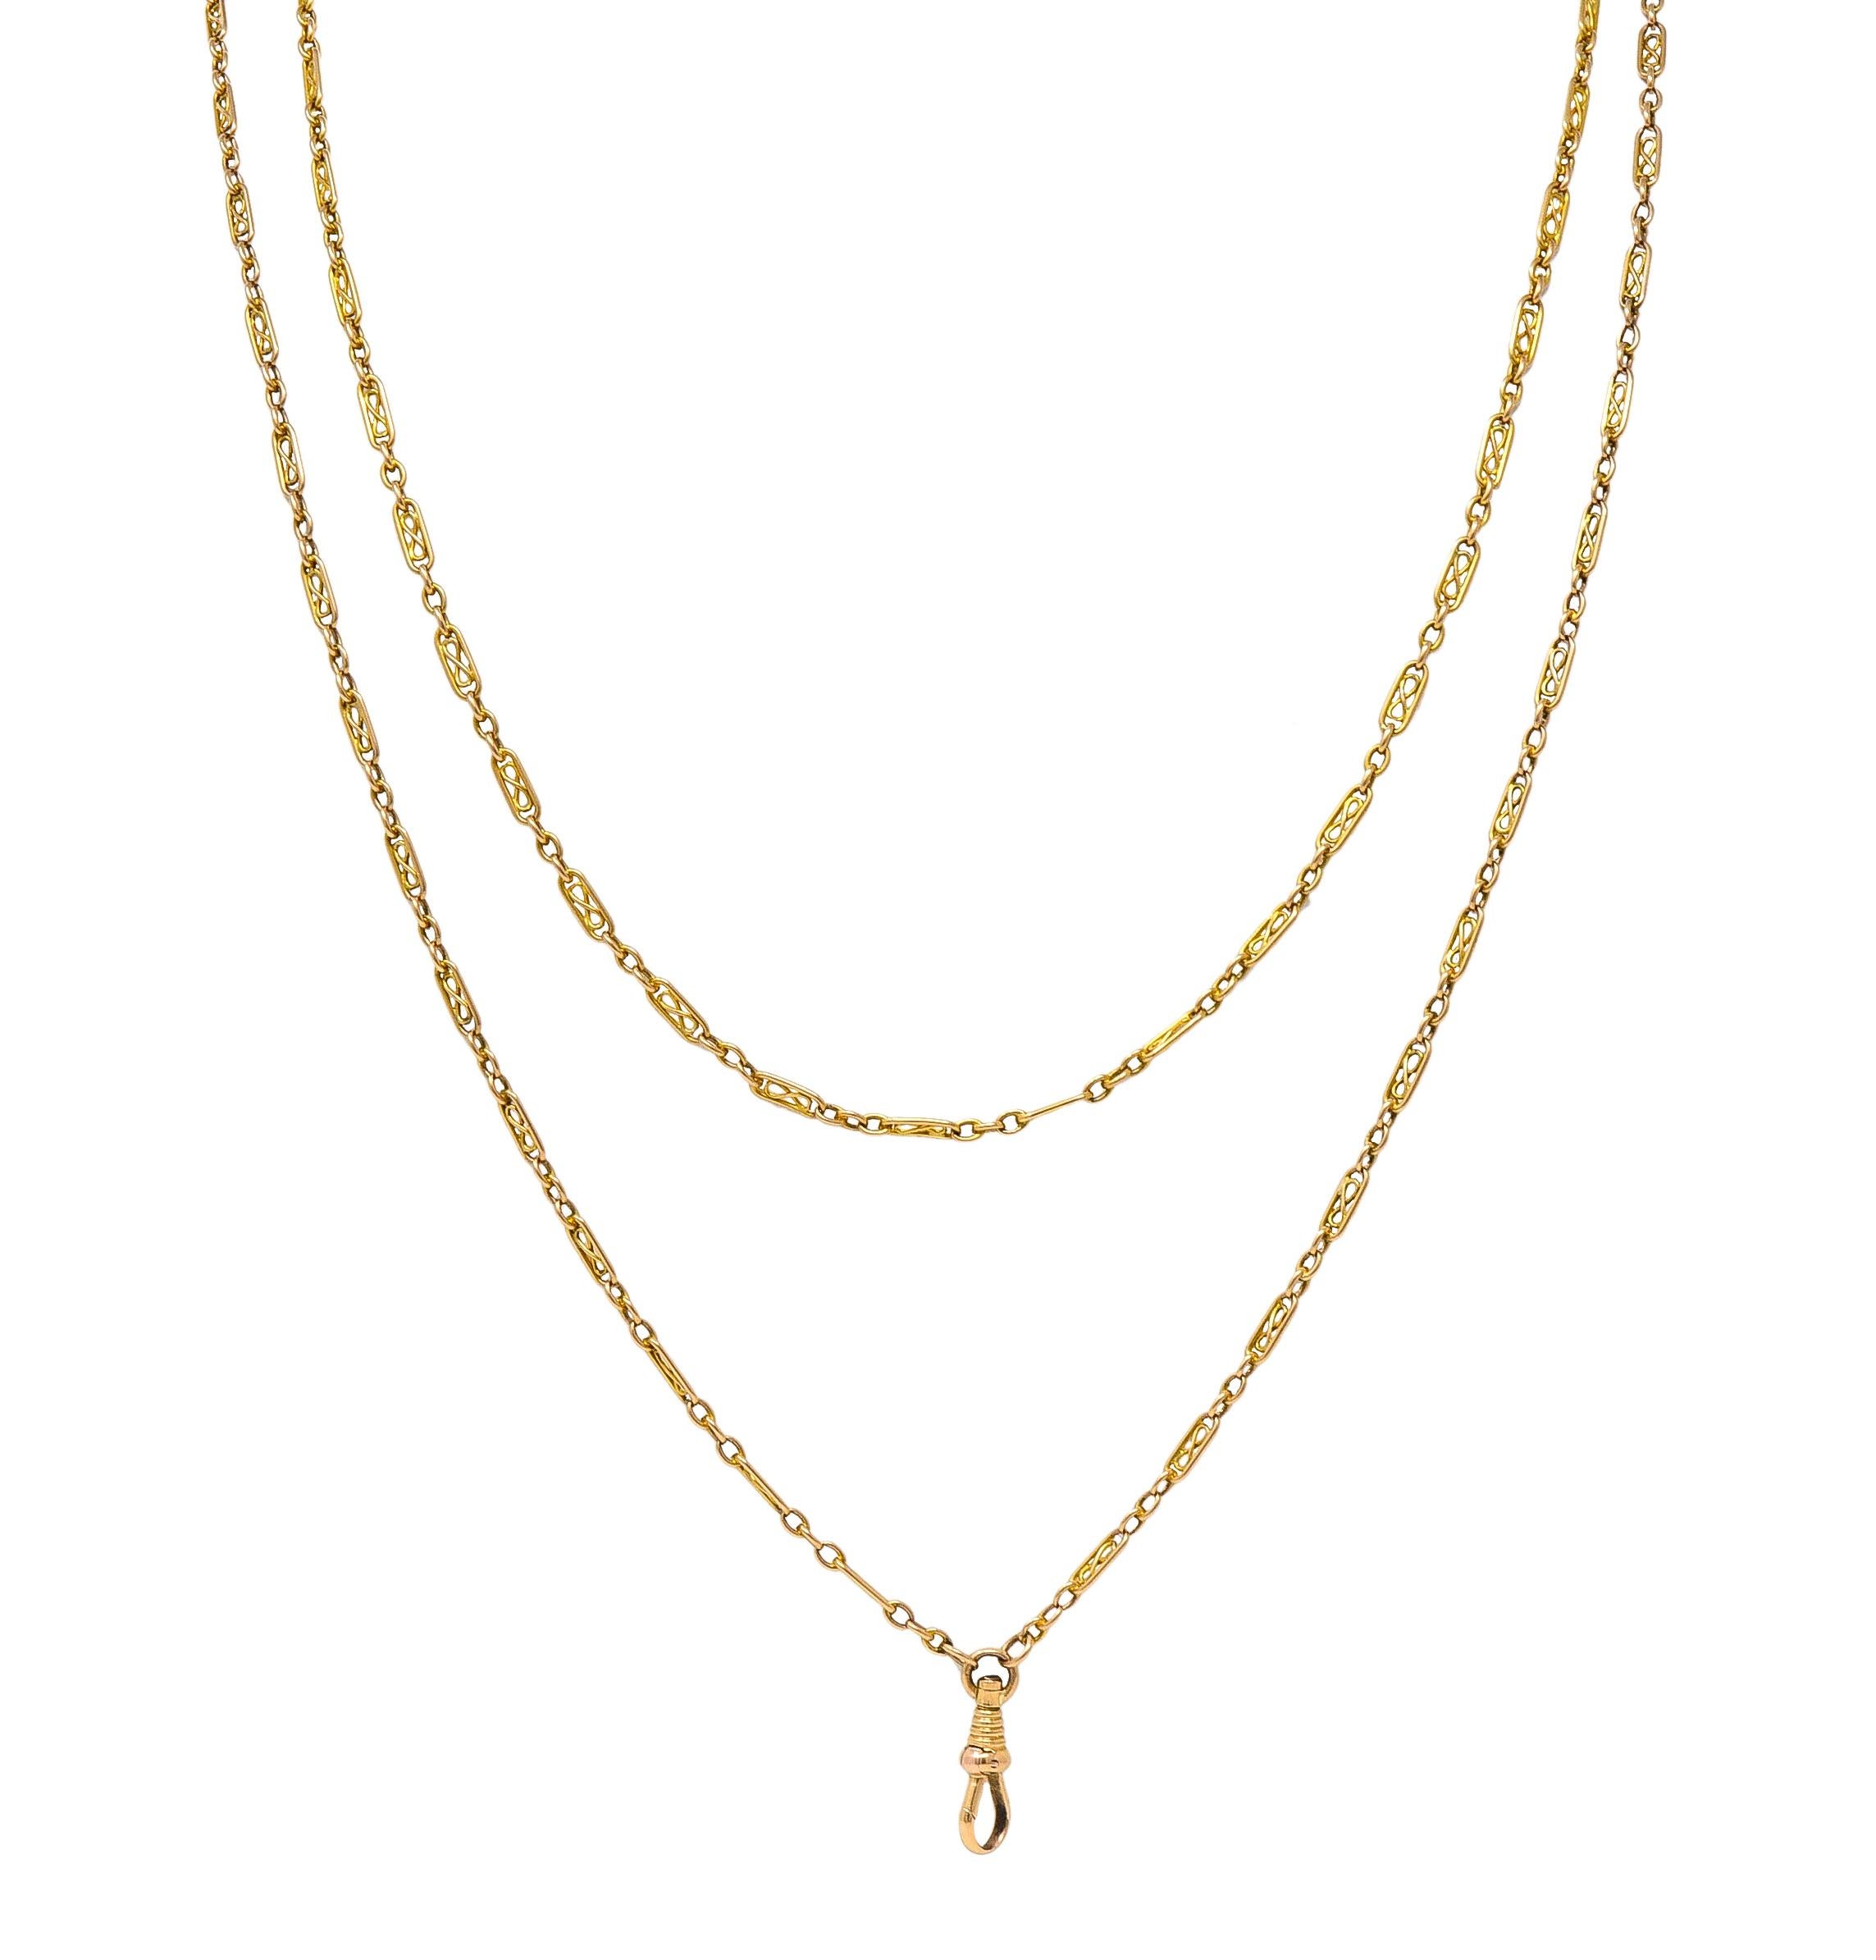 Victorian 14 Karat Yellow Gold Link 64 1/2 IN Long Antique Fob Chain Necklace For Sale